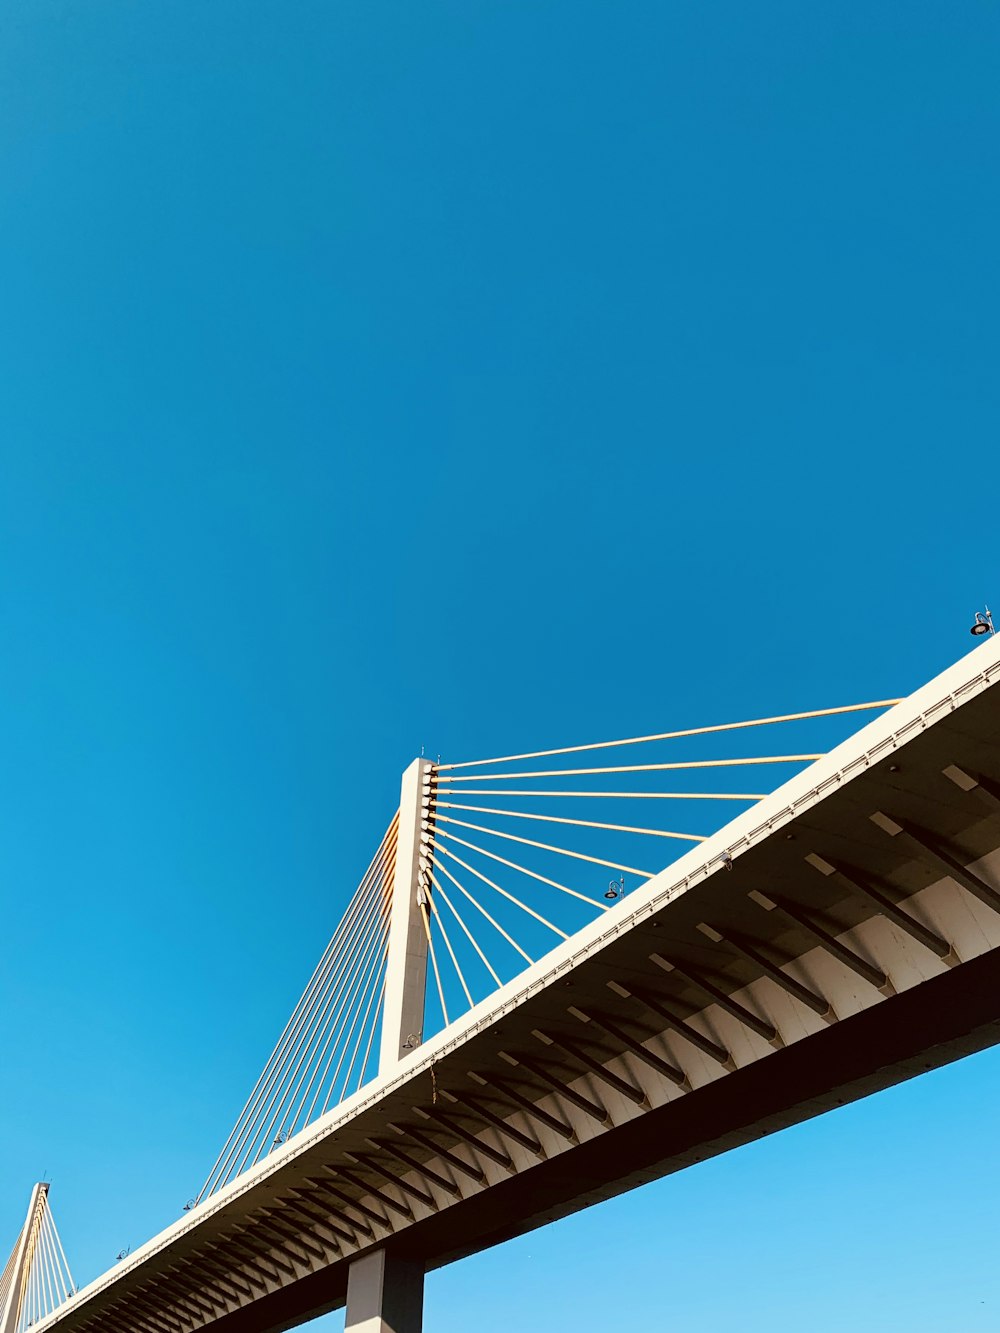 a bridge with a blue sky in the background